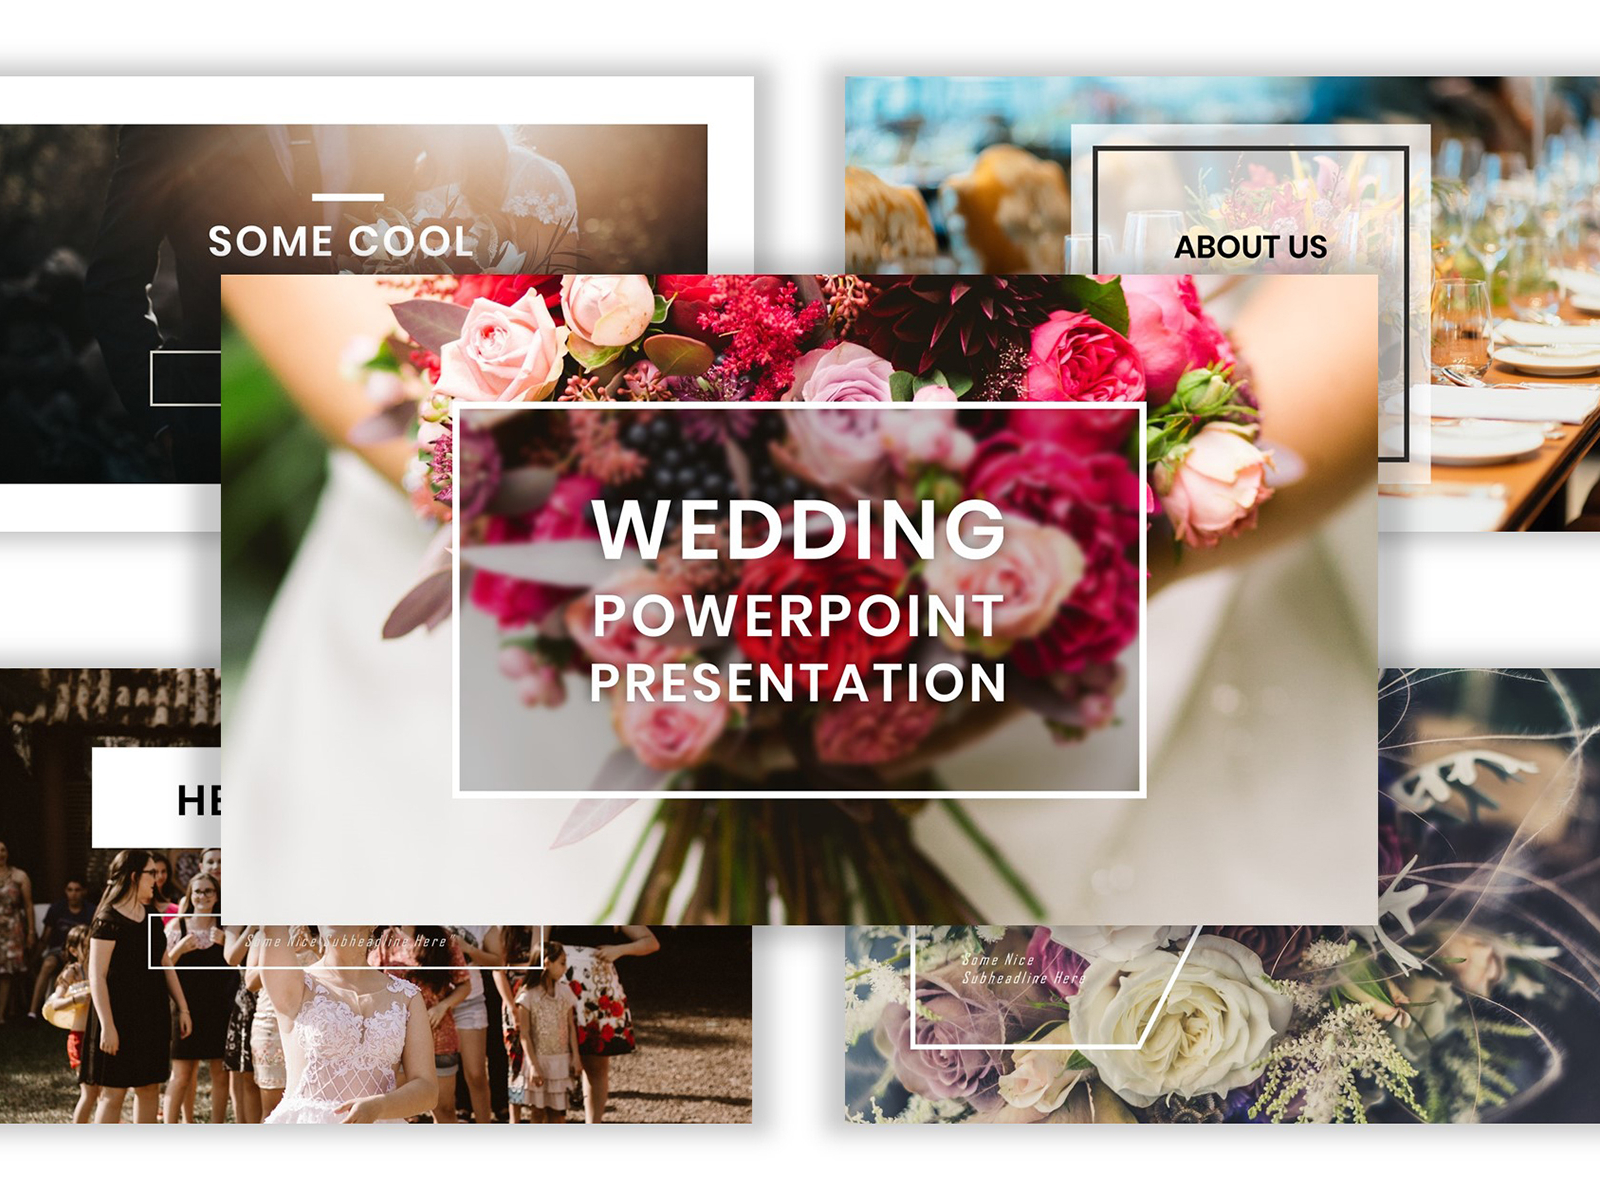 Wedding PowerPoint Template by TemplateMonster on Dribbble